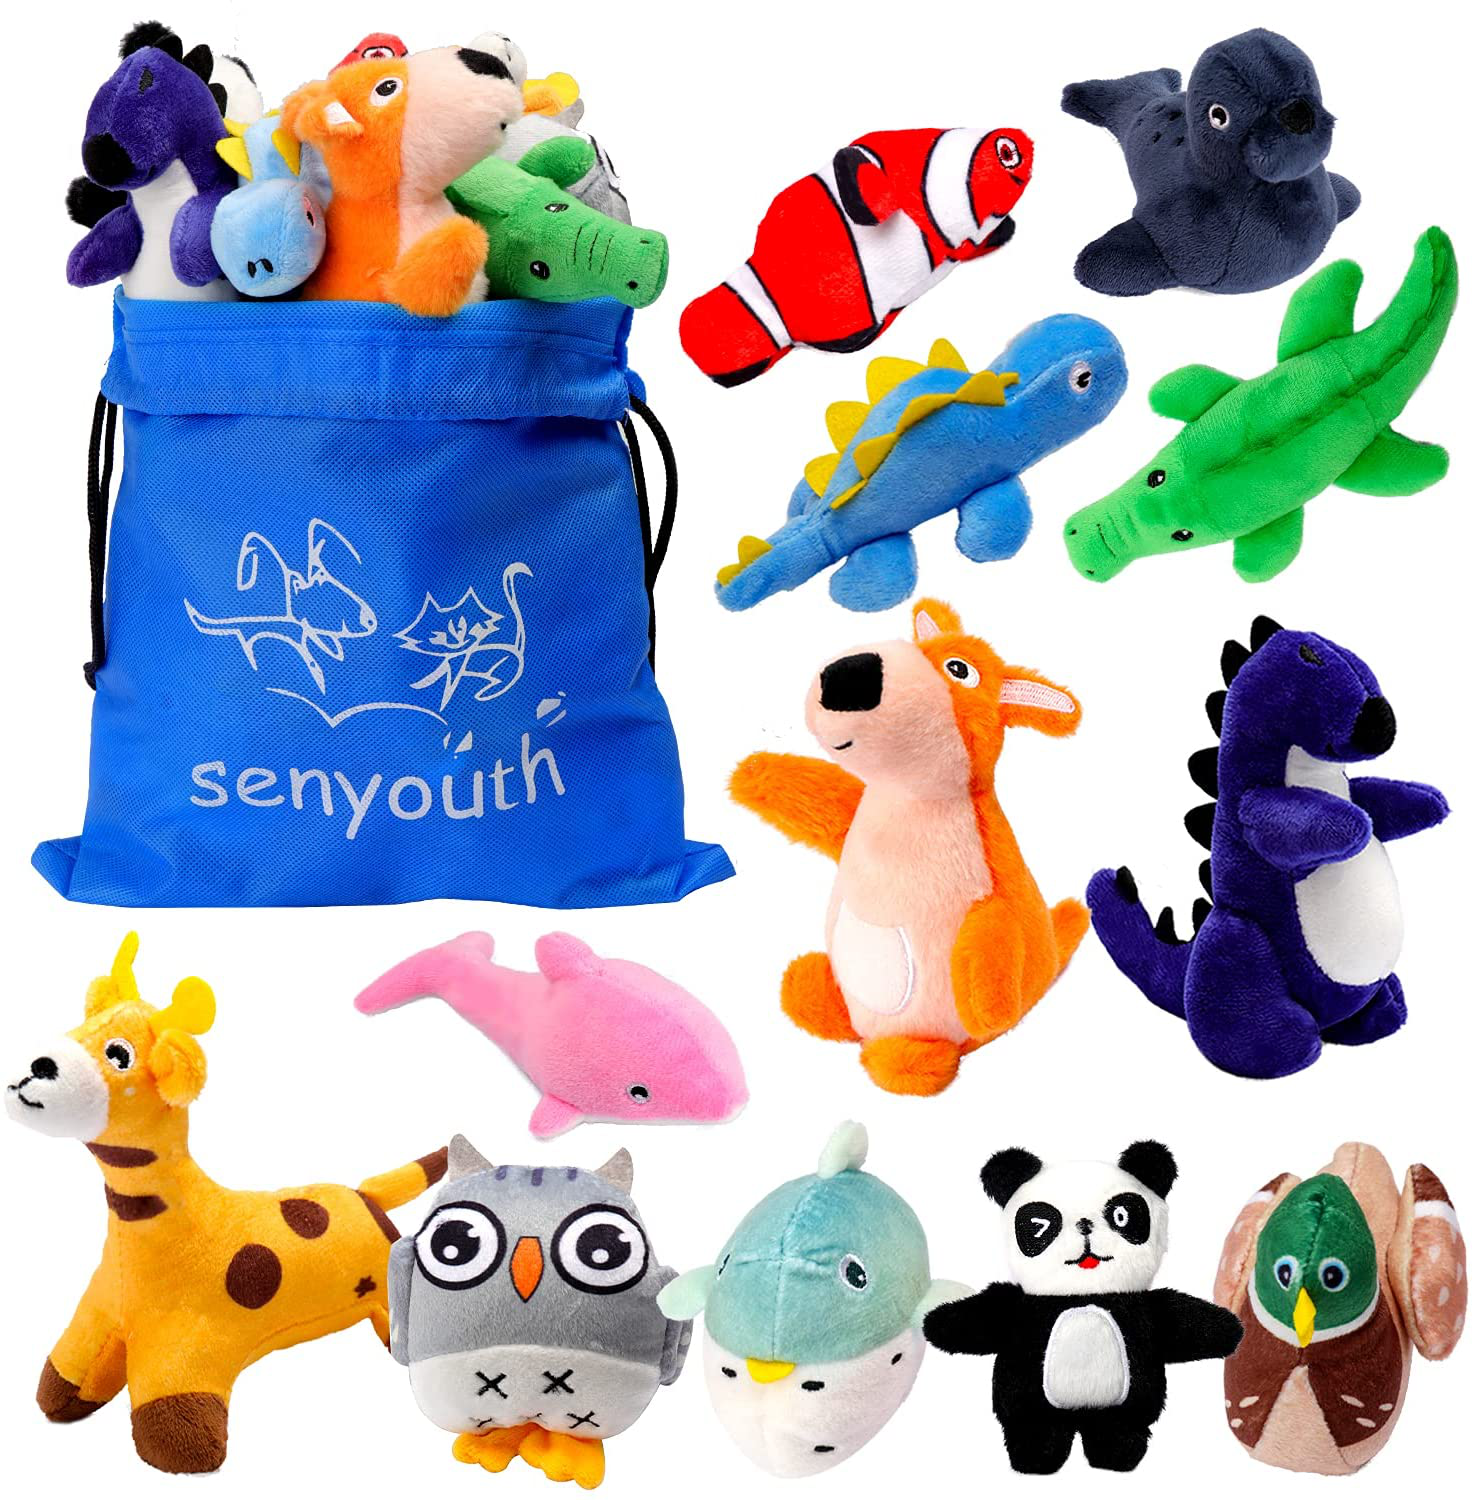 Senyoung Dog Toys,12 Pack Dog Squeaky Rope Chew Toy Sets, Interactive Cute and Stuffed Plush Squeaker Toys, Tough Puppy Teething Cotton Tug Soft Toys, Puppy Toys Small, for Small / Medium Dog Toys Animals & Pet Supplies > Pet Supplies > Dog Supplies > Dog Toys SenYoung Animal-2  